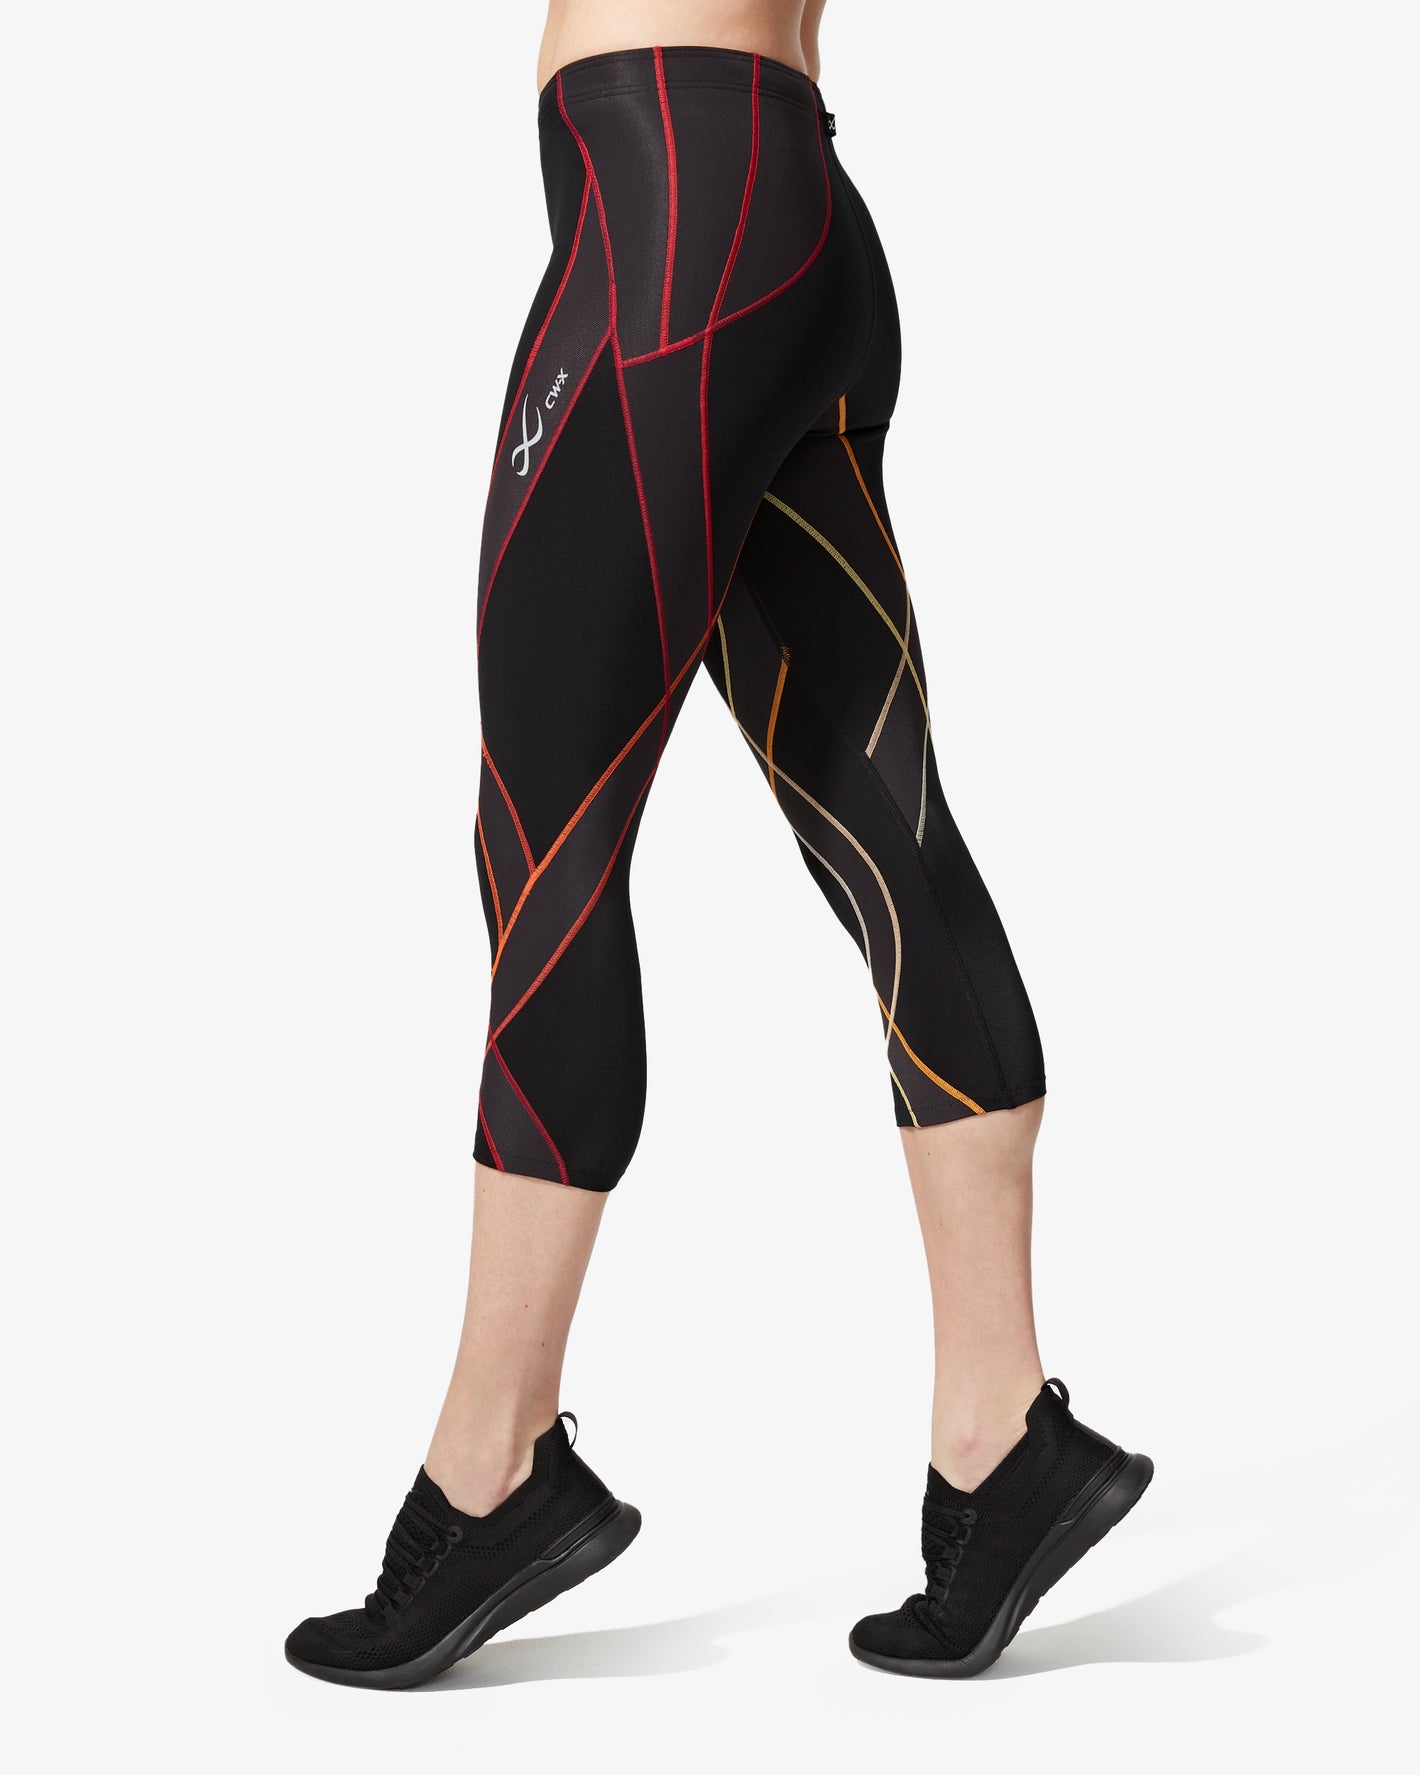 CW-X Stabilyx Joint Support Compression 3/4 Athletic Tight Pants